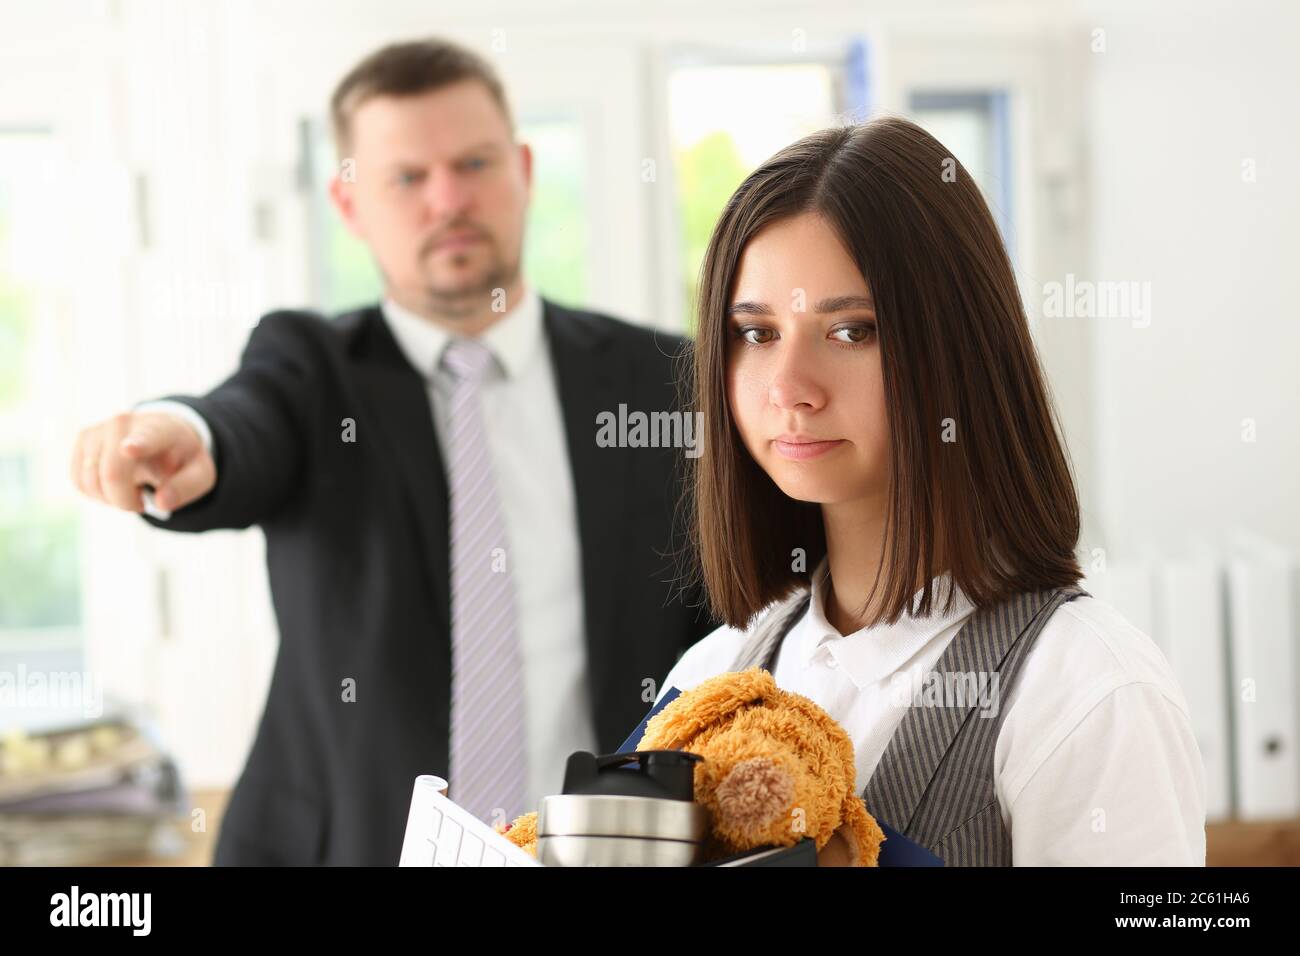 Female office worker getting fired from job Stock Photo